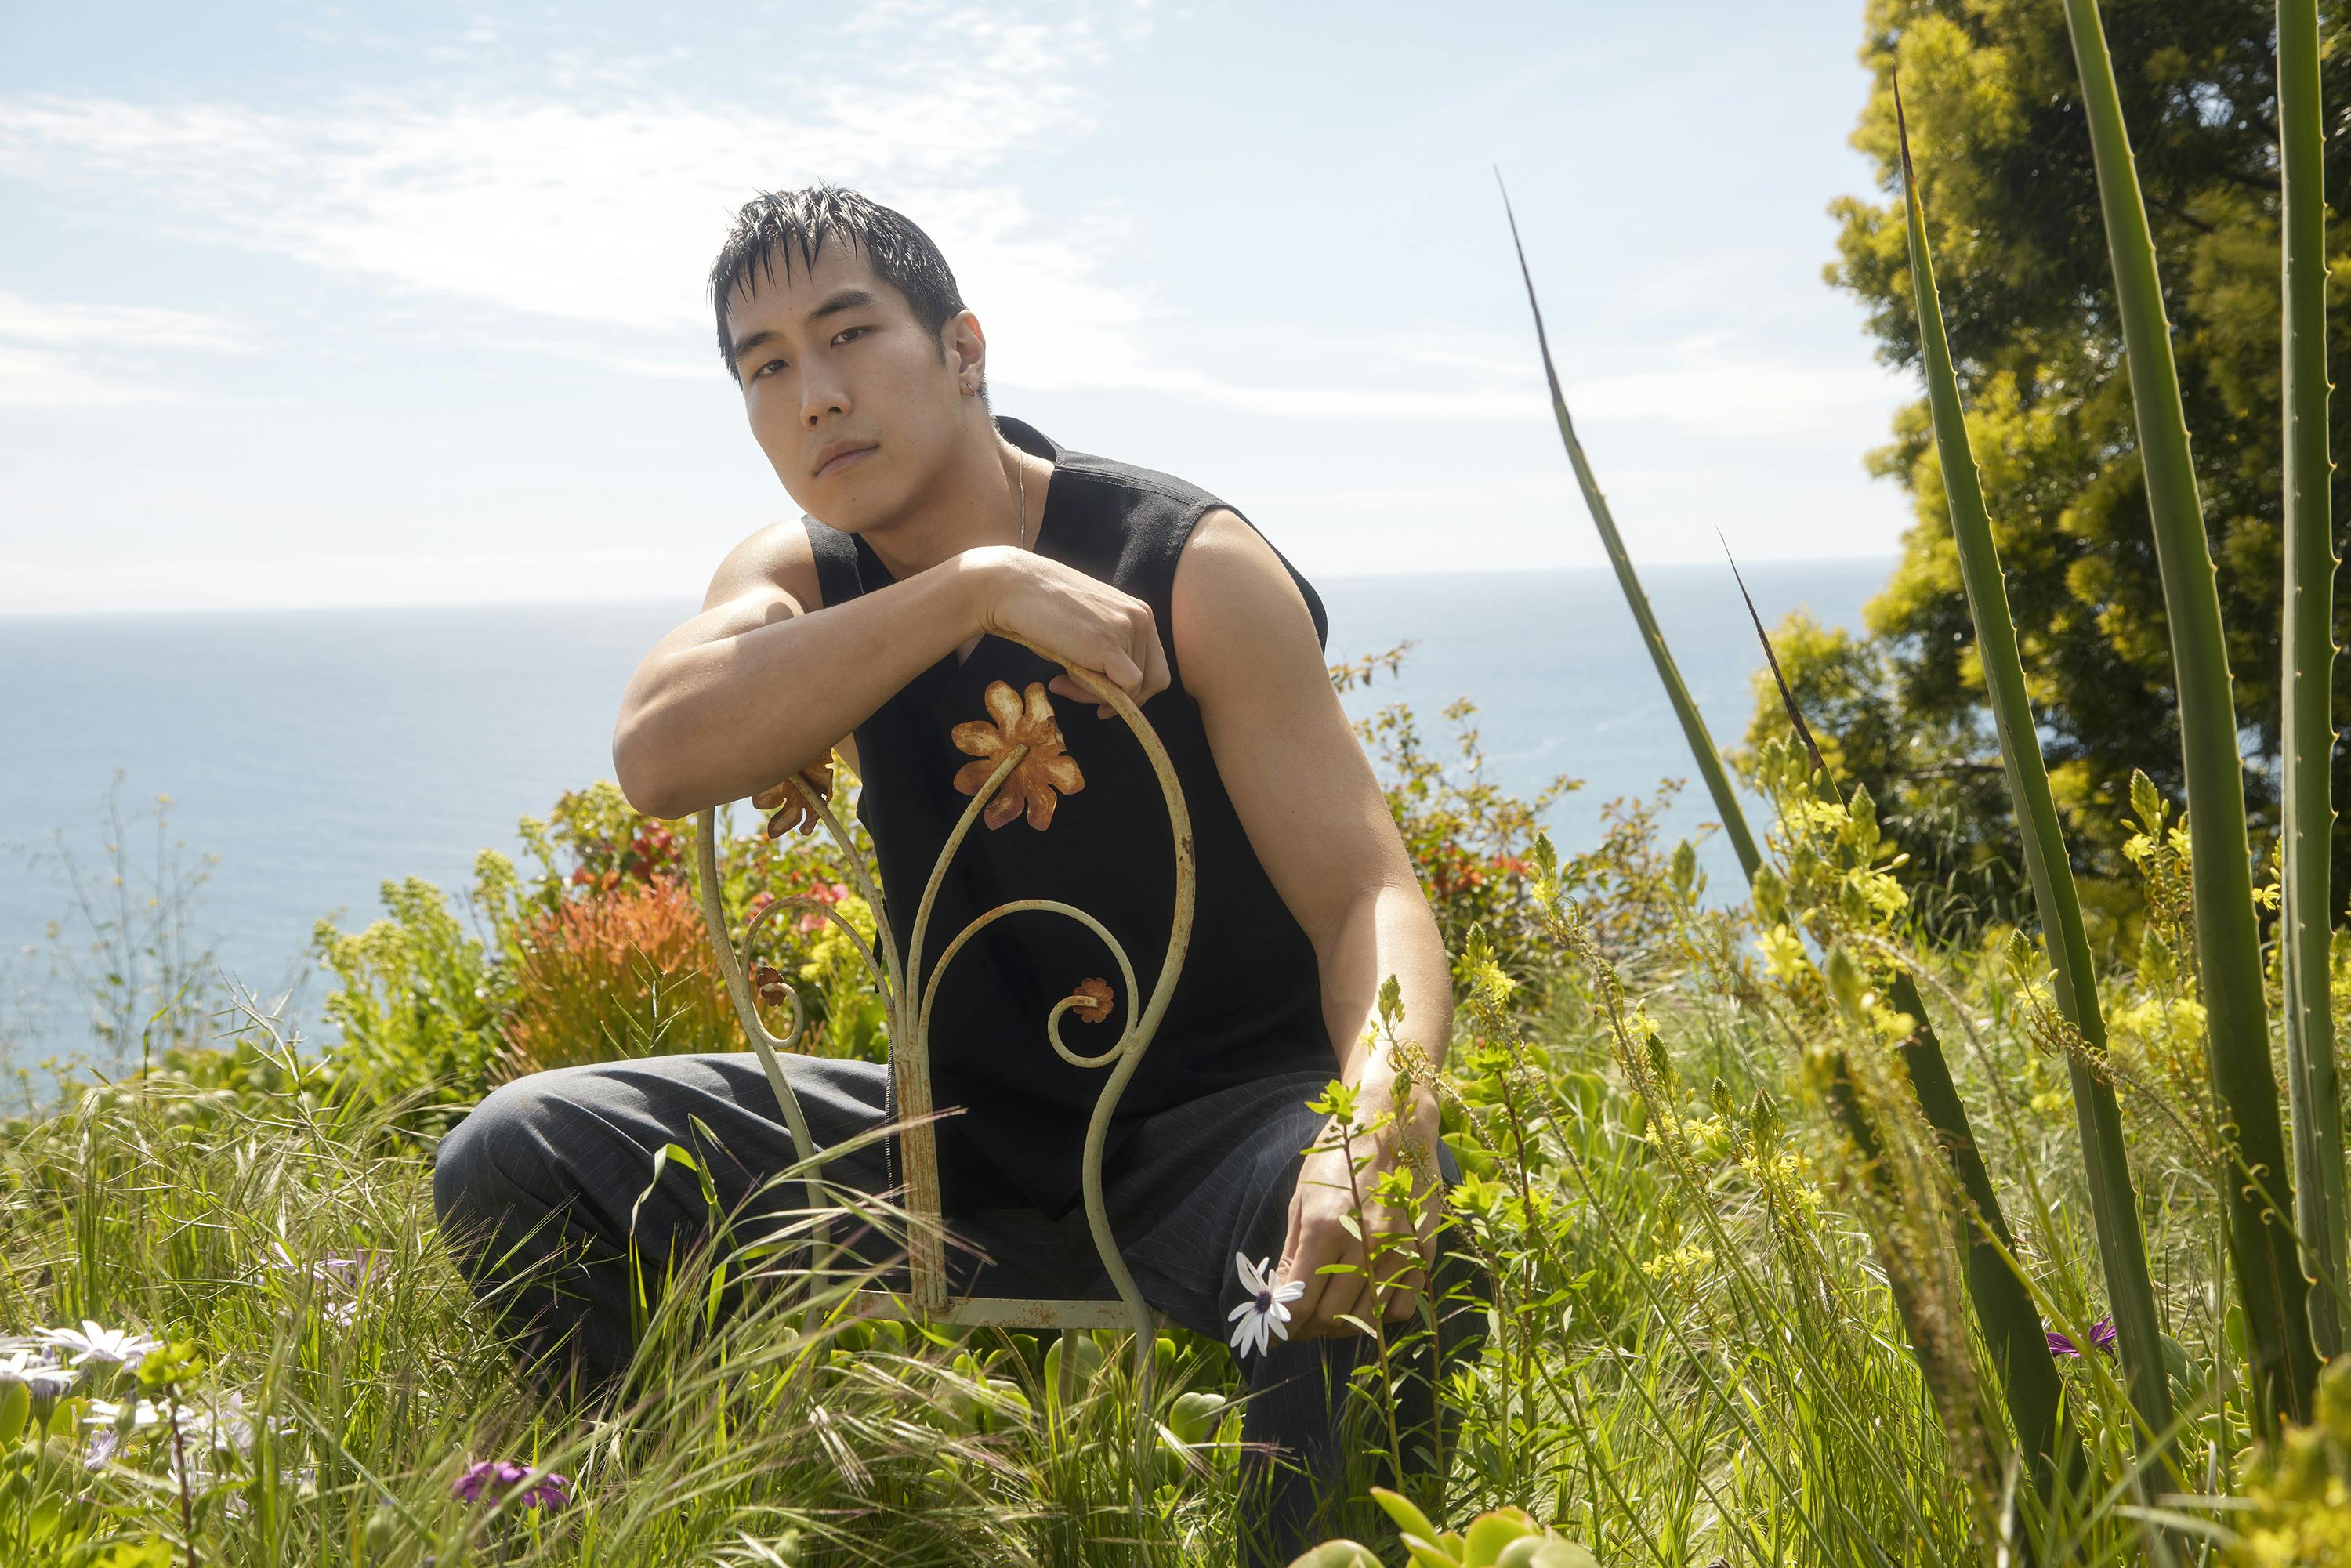 Young Mazino looks like the original man in this sunny, verdant shot. He sits on a curlicue metal chair and wears all black—including a black tank top. His hair is combed forward and he smizes at the camera. 